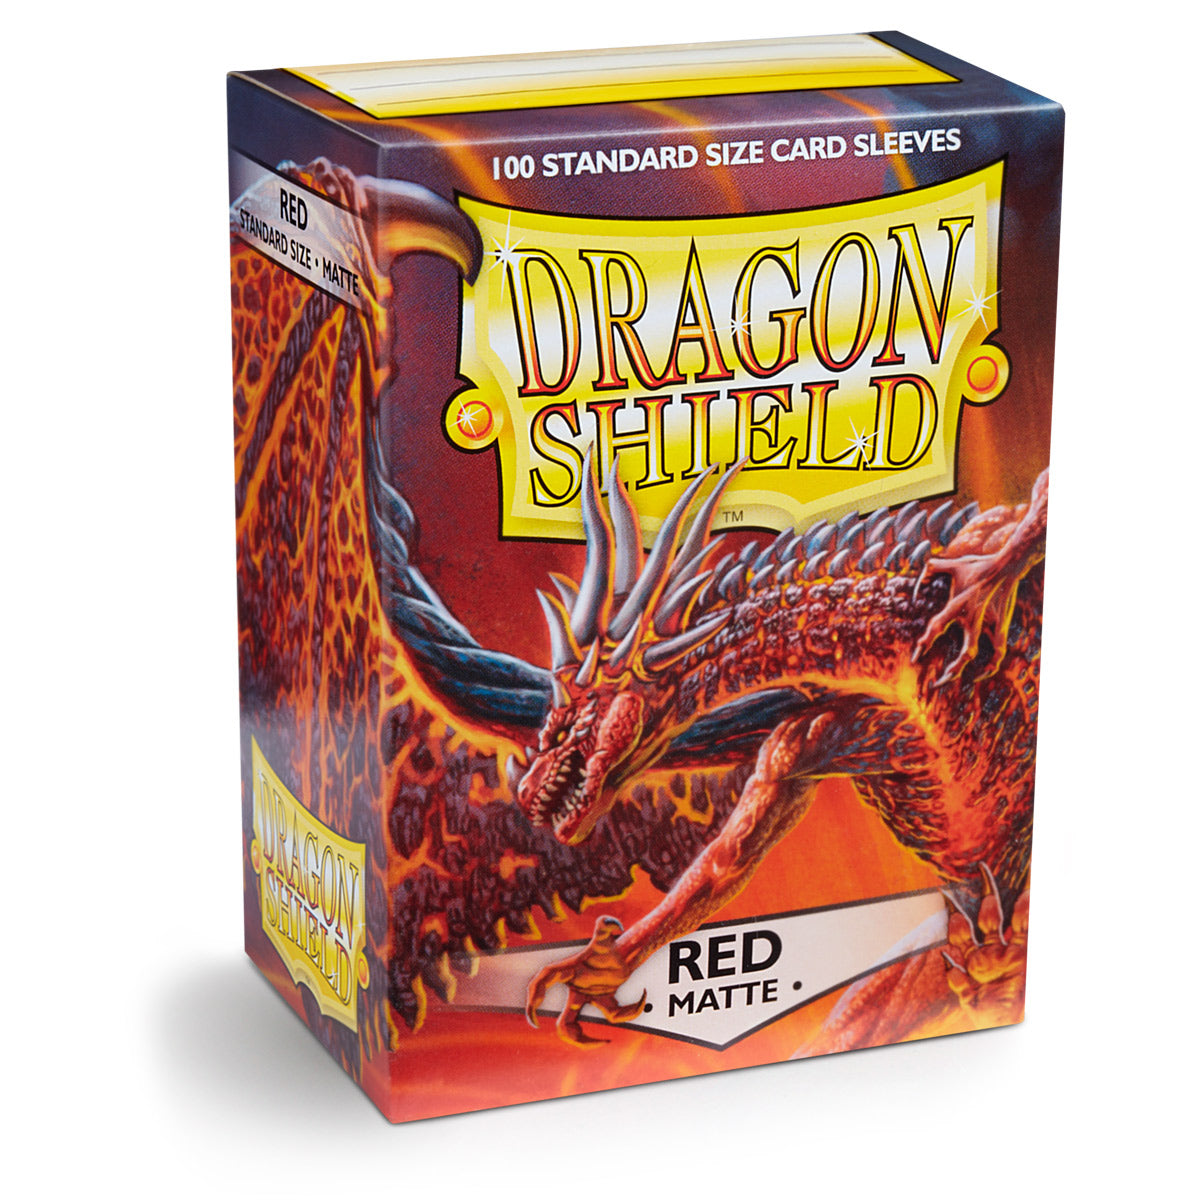 Dragon Shield Deck Protector Sleeves - Matte Red (100 Count)